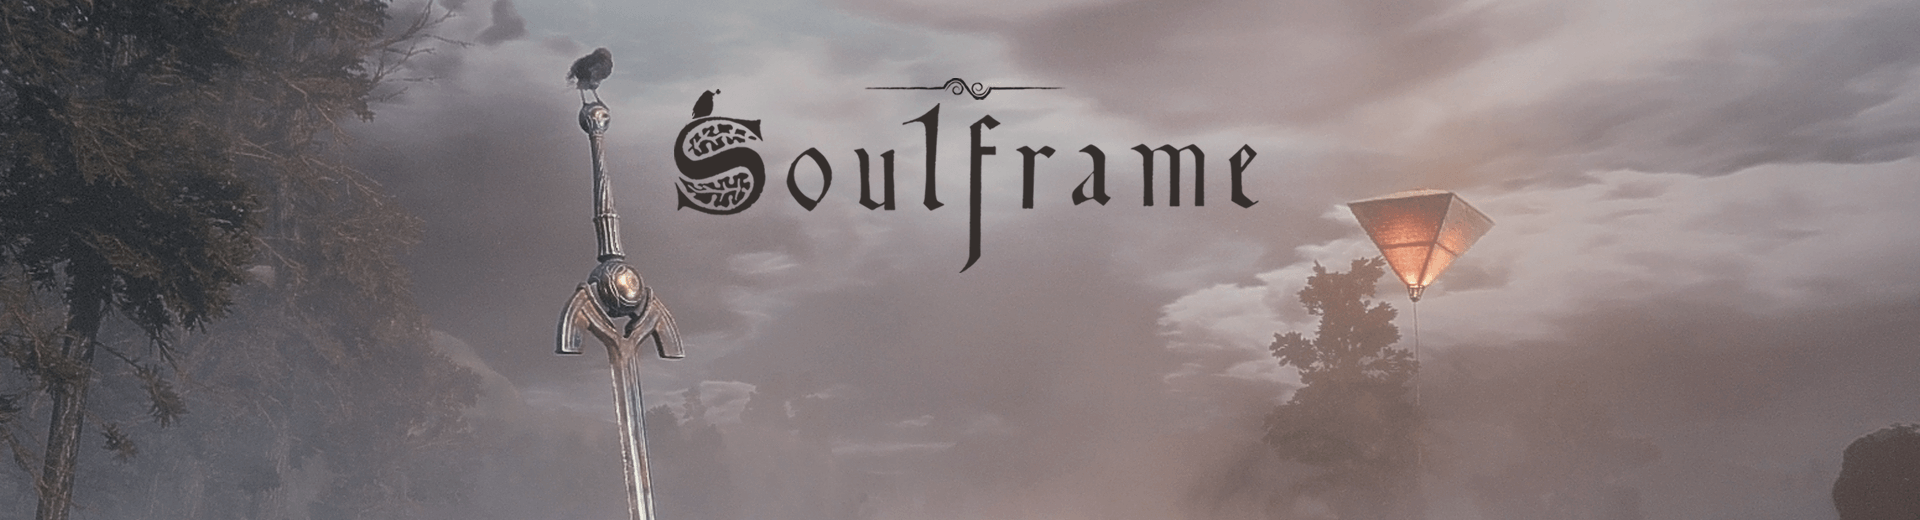 DIGITAL EXTREMES REVEALS NEW GAME 'SOULFRAME'